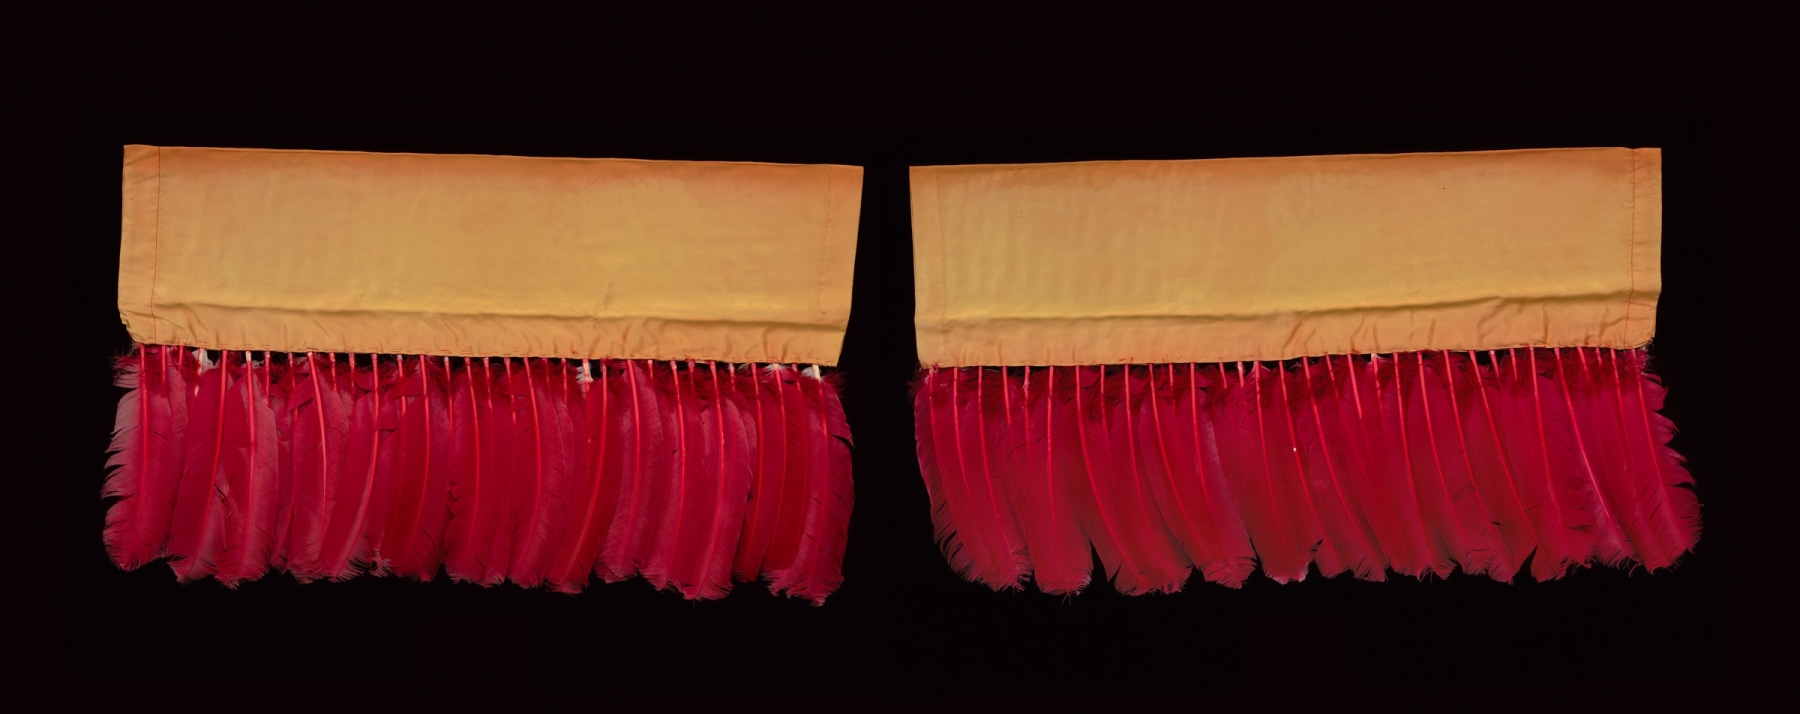 James Lee Byars

&amp;ldquo;The Wings for Writing&amp;rdquo;, ca. 1972

Dyed feathers, silk, thread

Two parts, each:

19 x 32 3/4 inches

48 x 83 cm

JB 7/F

$275,000